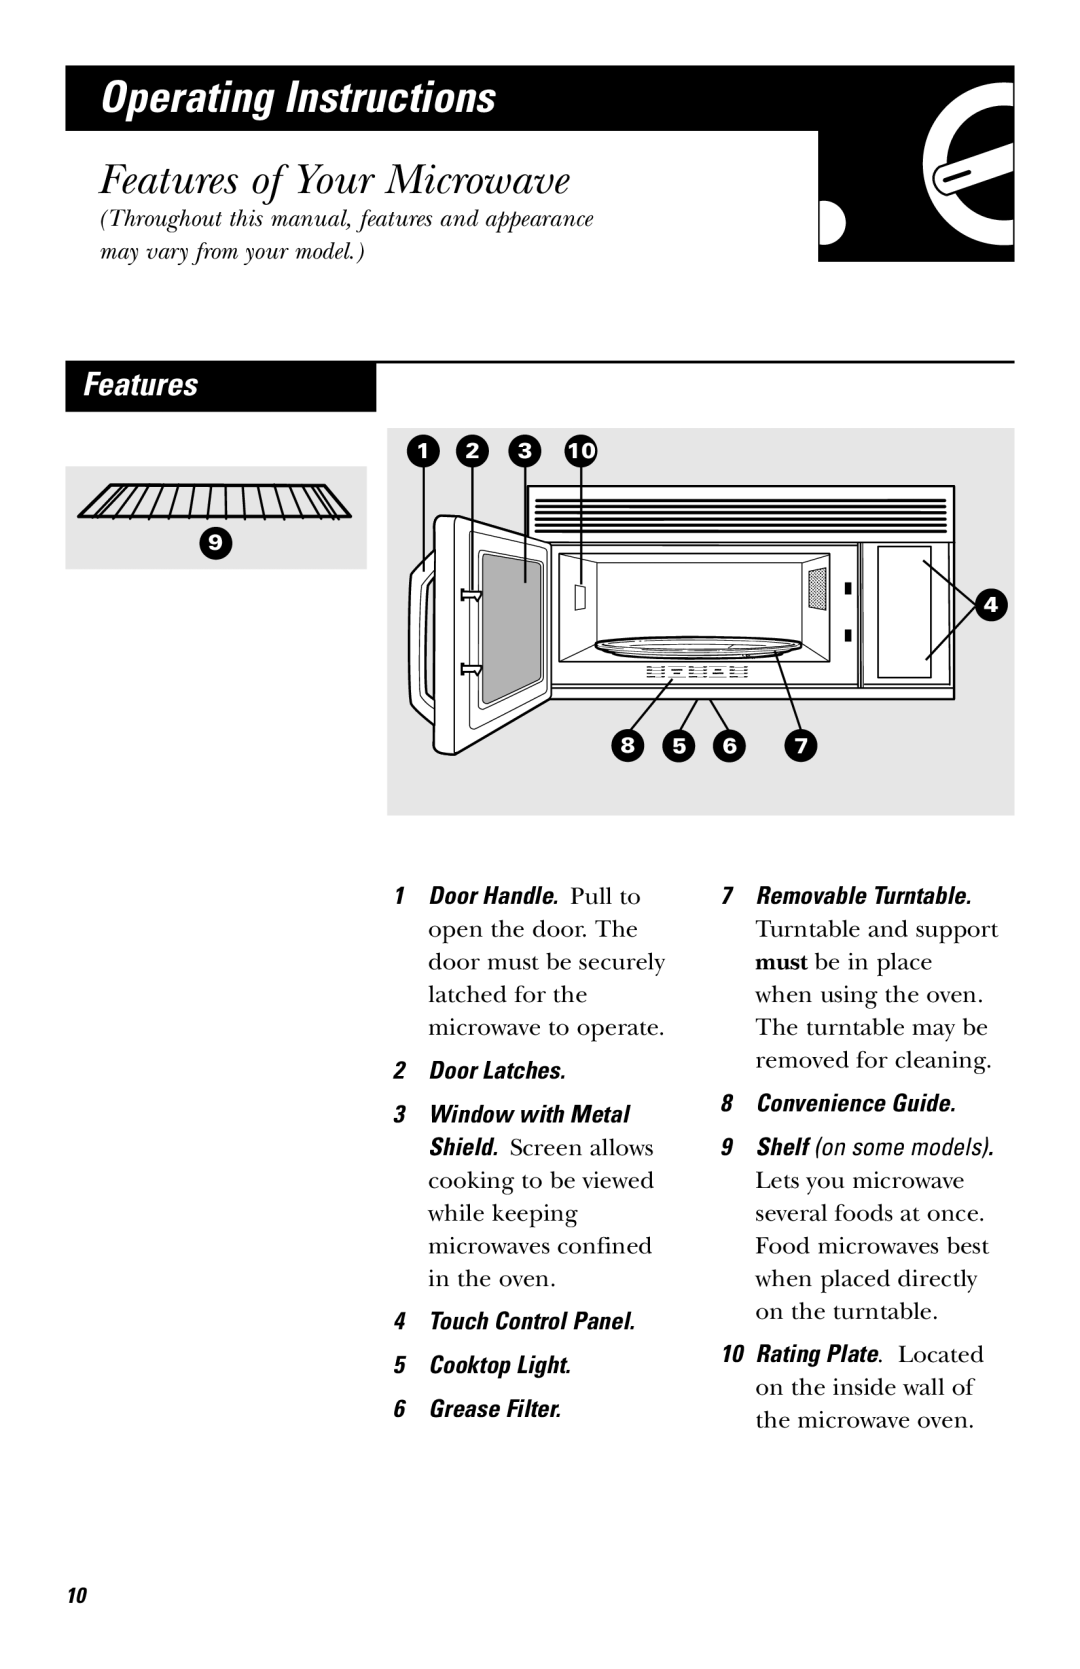 GE JVM1530 Operating Instructions, Features of Your Microwave, 2Door Latches, 4Touch Control Panel 5Cooktop Light 